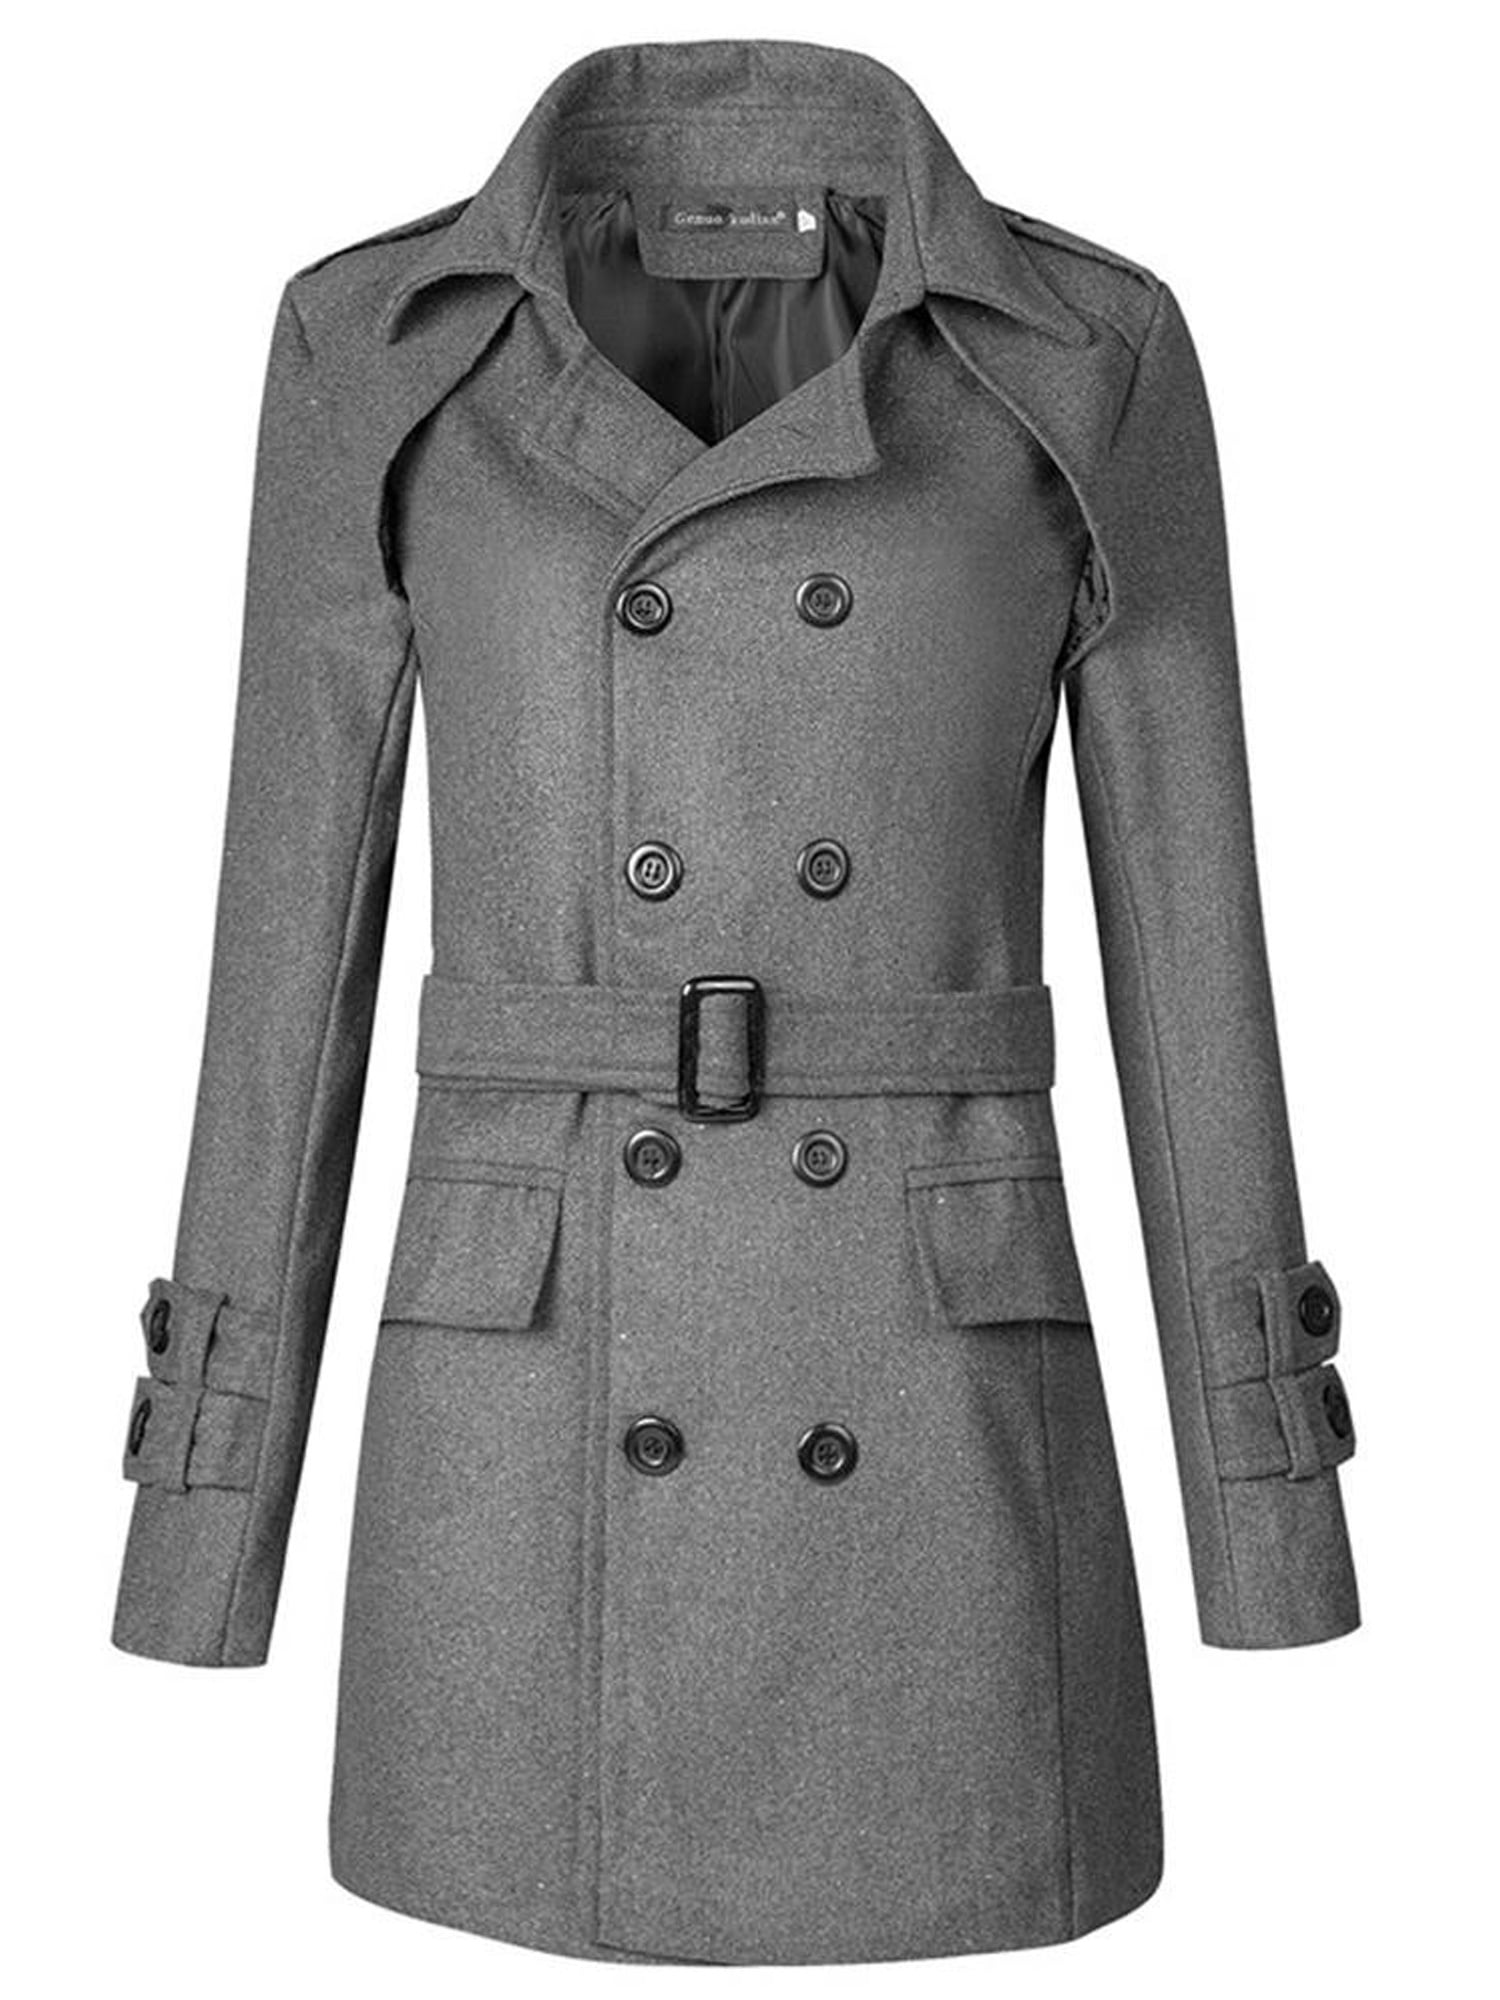 CHENMA Women Double Breasted Long Sleeve Sweatshirt Jacket Trench Coat With Removable Hood